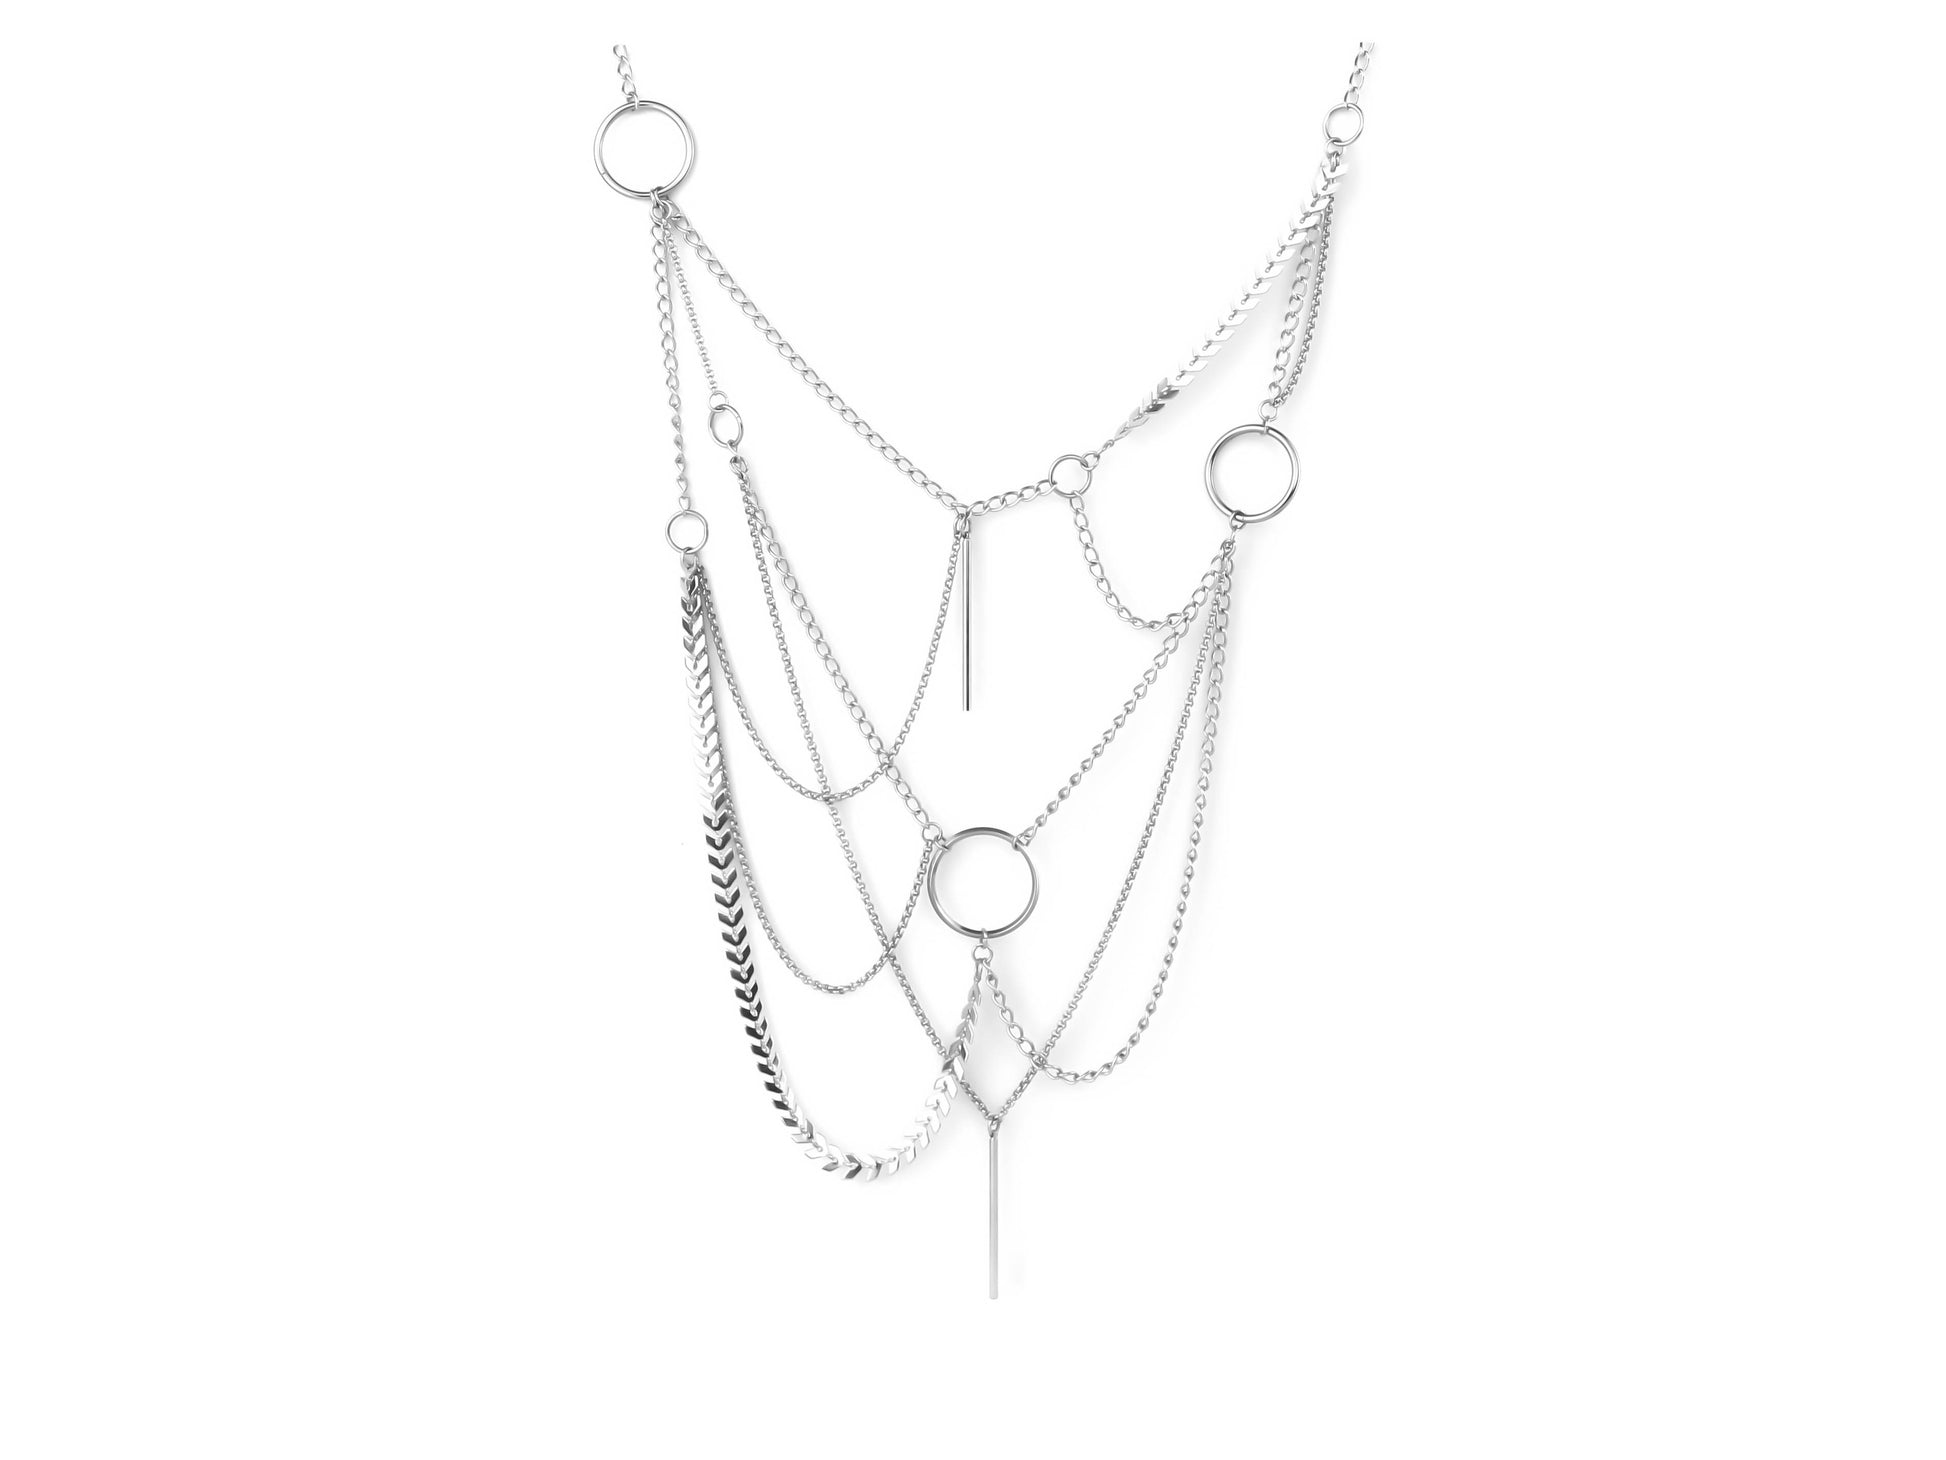 Multi-layered Myril Jewels necklace, cascading chains with central o-ring. Ideal for gothic-chic, Witchcore enthusiasts or as a bold statement piece at rave parties. A perfect goth girlfriend or friend gift, embodying dark-avantgarde elegance for festival or everyday wear.